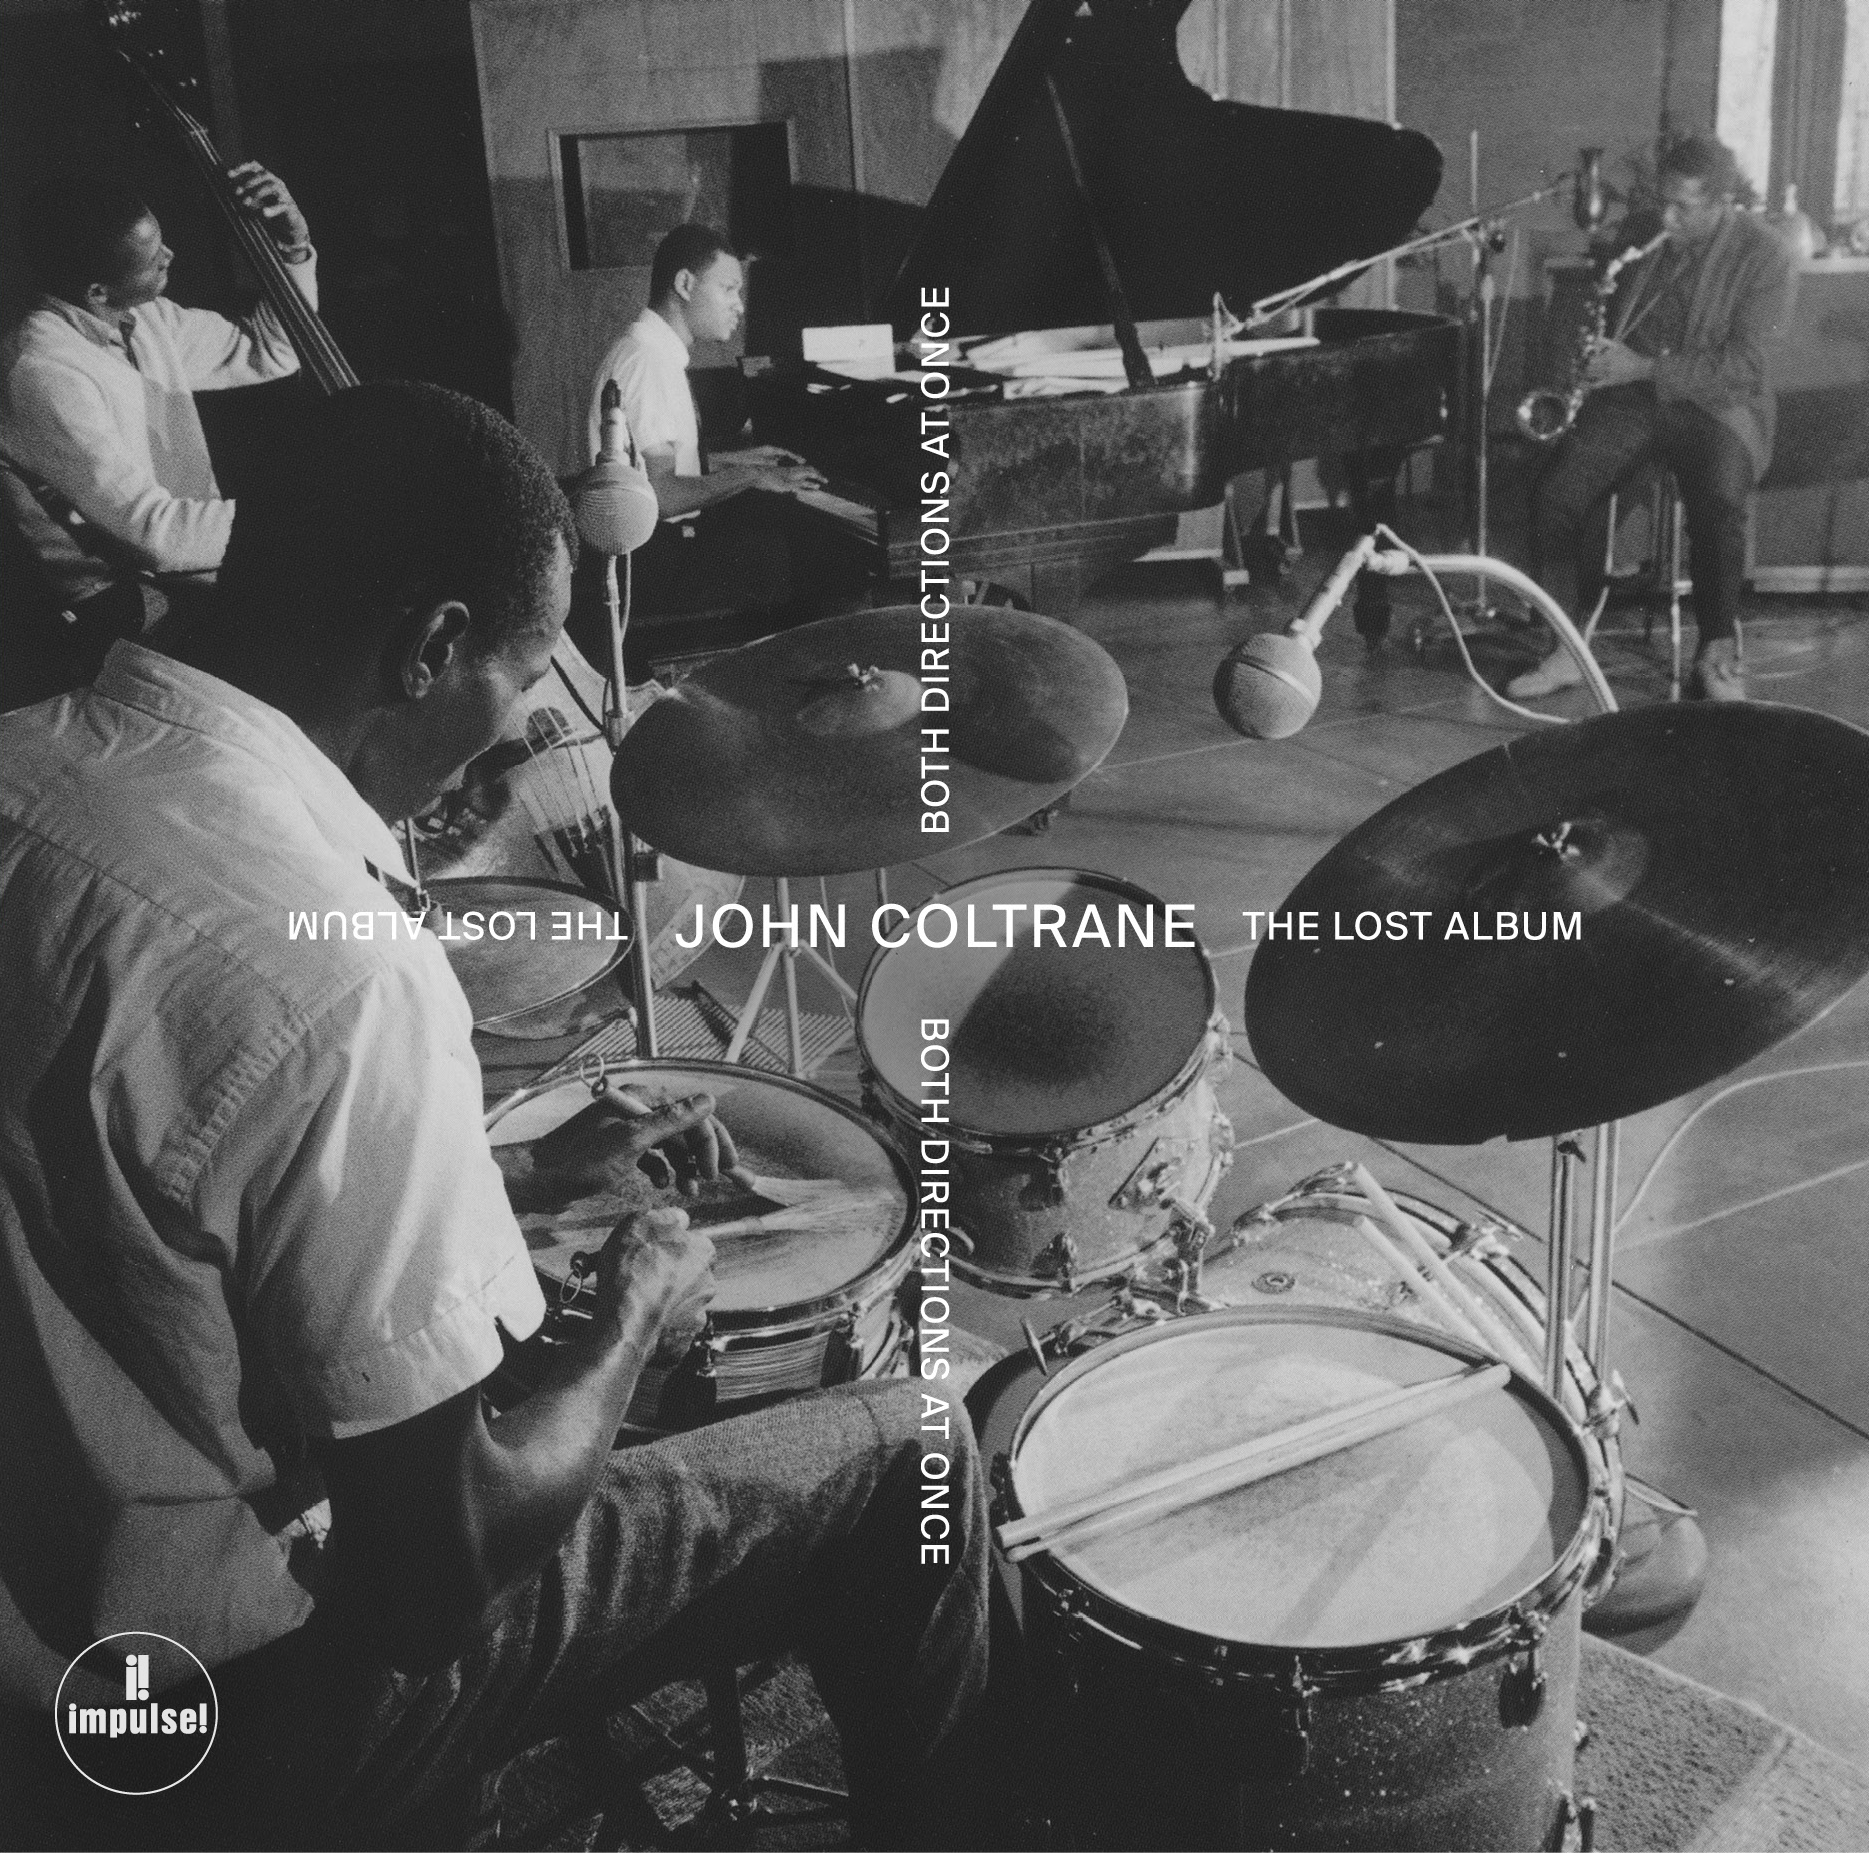 Both Directions at Once: The Lost Album a New John Coltrane Album